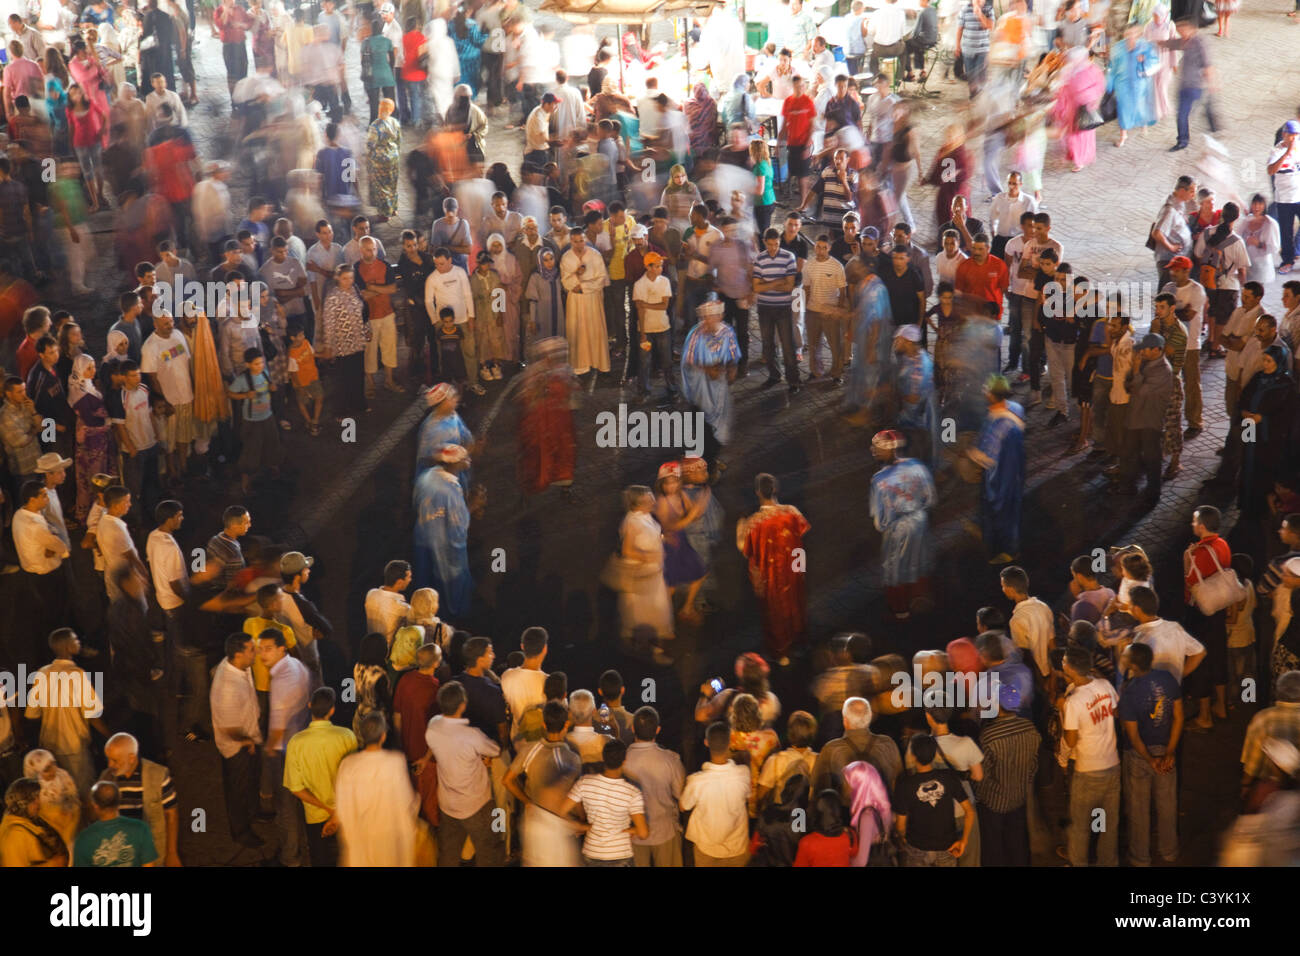 People dance at Djemaa el Fna square at night in the heart of Marrakech, Morocco. Stock Photo